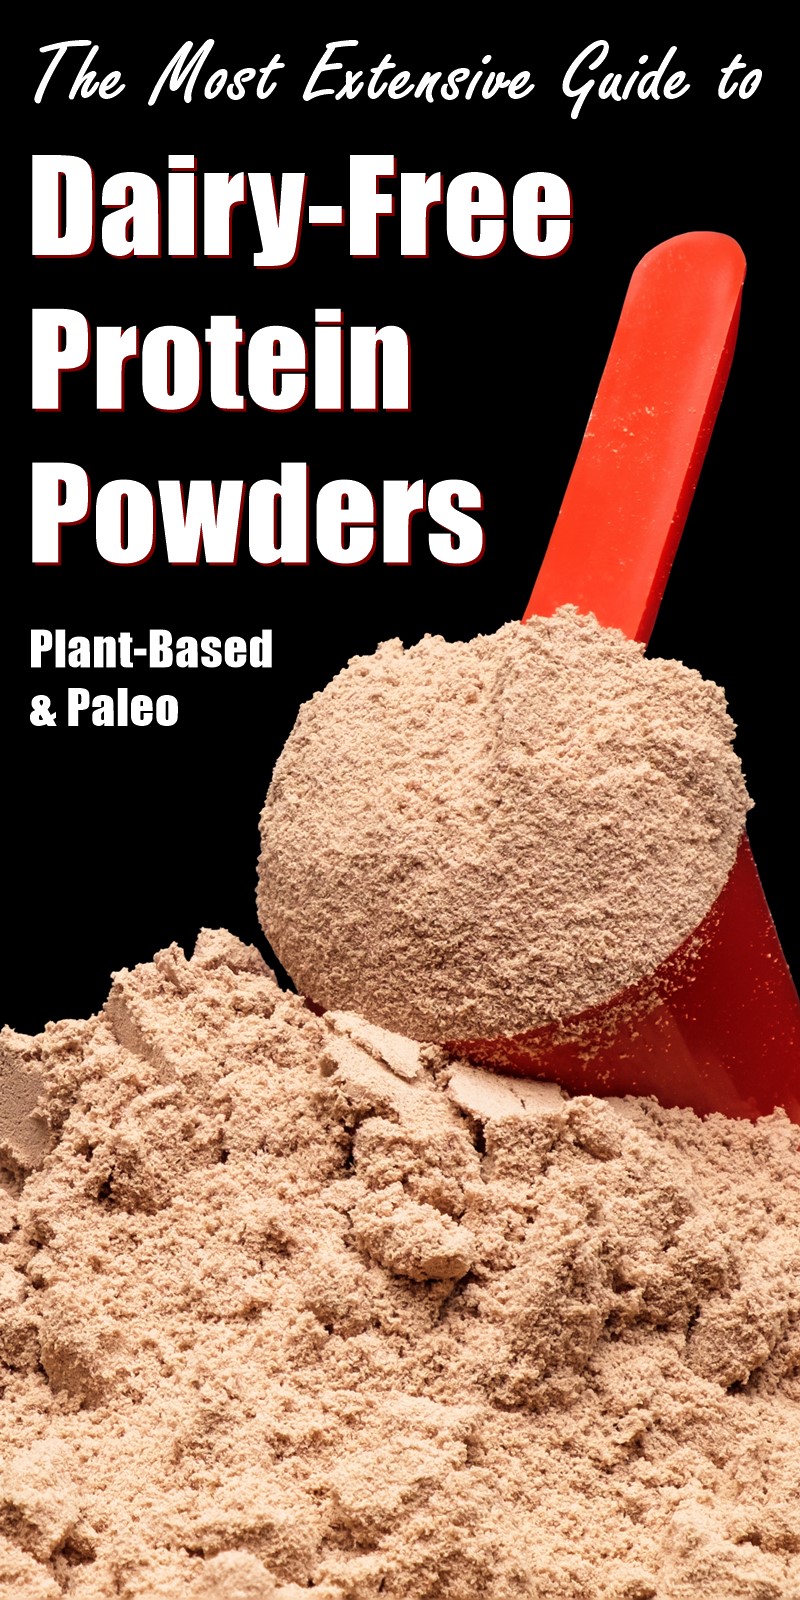 Dairy-Free Protein Powders Guide - The Most Extensive Resource from Go Dairy Free with Plant-Based and Paleo Options